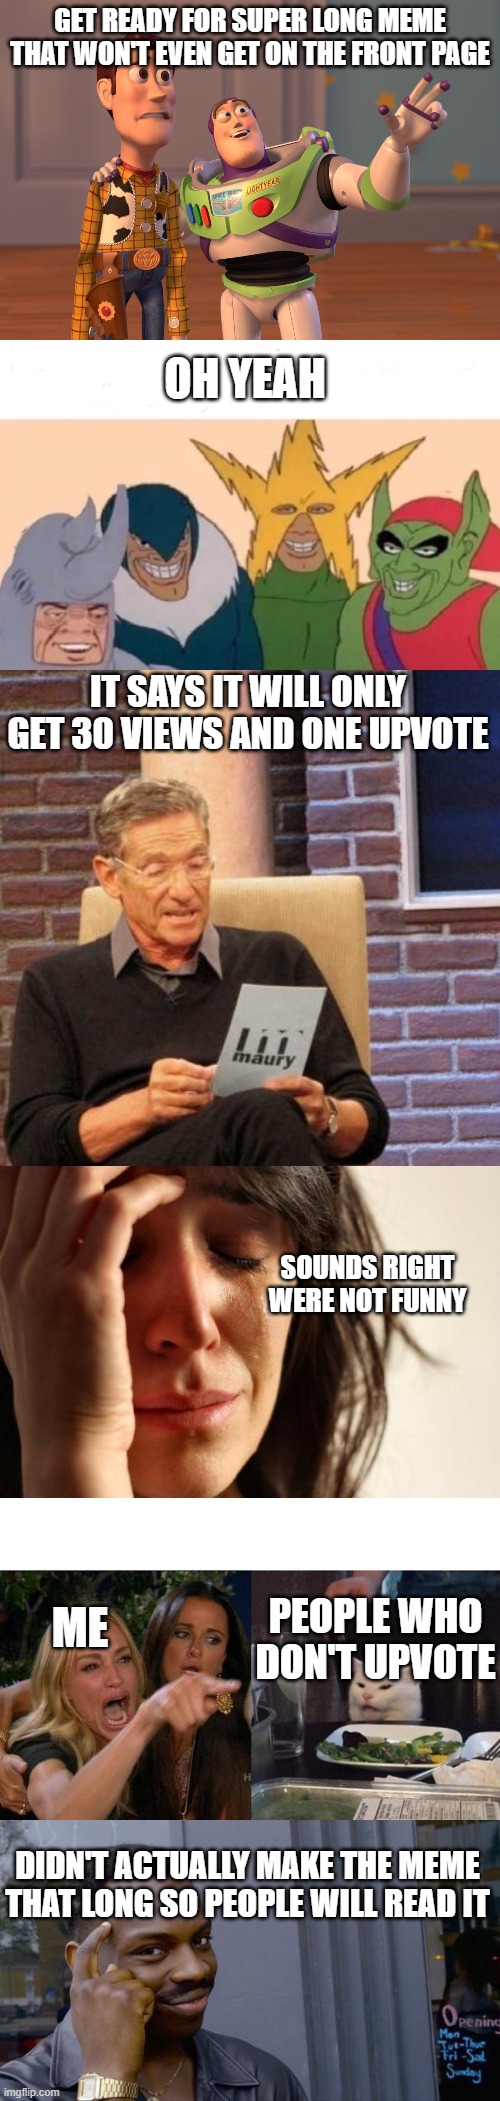 GET READY FOR SUPER LONG MEME THAT WON'T EVEN GET ON THE FRONT PAGE; OH YEAH; IT SAYS IT WILL ONLY GET 30 VIEWS AND ONE UPVOTE; SOUNDS RIGHT WERE NOT FUNNY; ME; PEOPLE WHO DON'T UPVOTE; DIDN'T ACTUALLY MAKE THE MEME THAT LONG SO PEOPLE WILL READ IT | image tagged in memes,first world problems,maury lie detector,roll safe think about it,x x everywhere,me and the boys | made w/ Imgflip meme maker